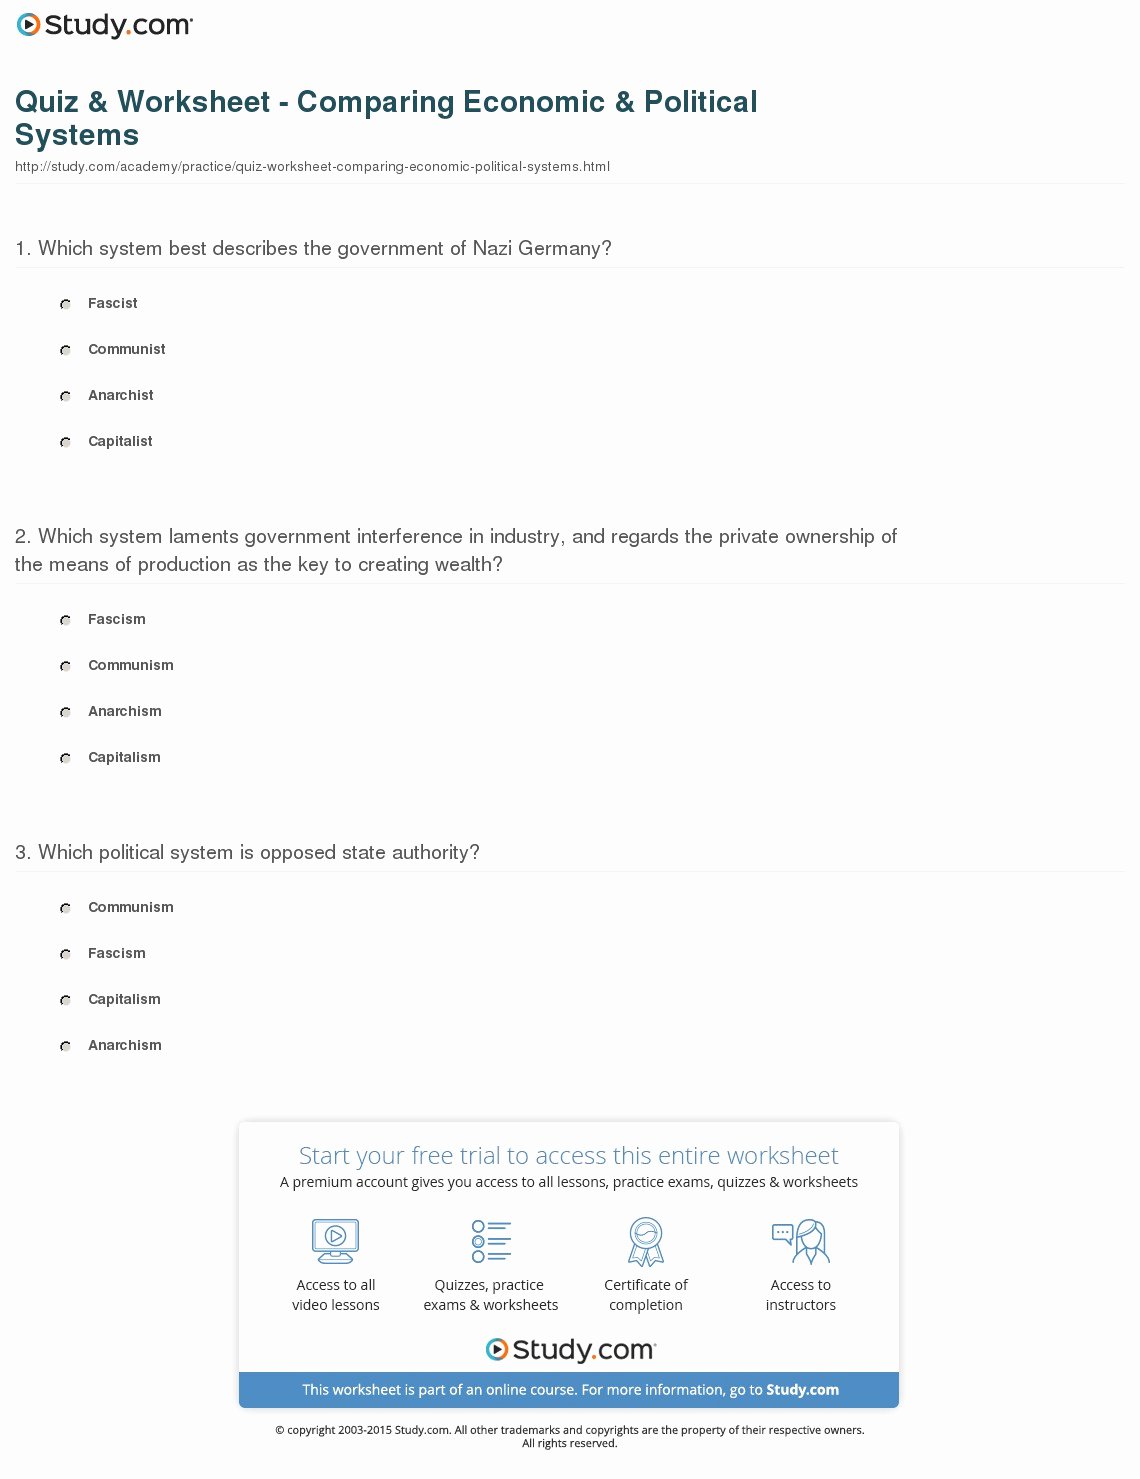 Factors Of Production Worksheet Answers Fresh Quiz &amp; Worksheet Paring Economic &amp; Political Systems